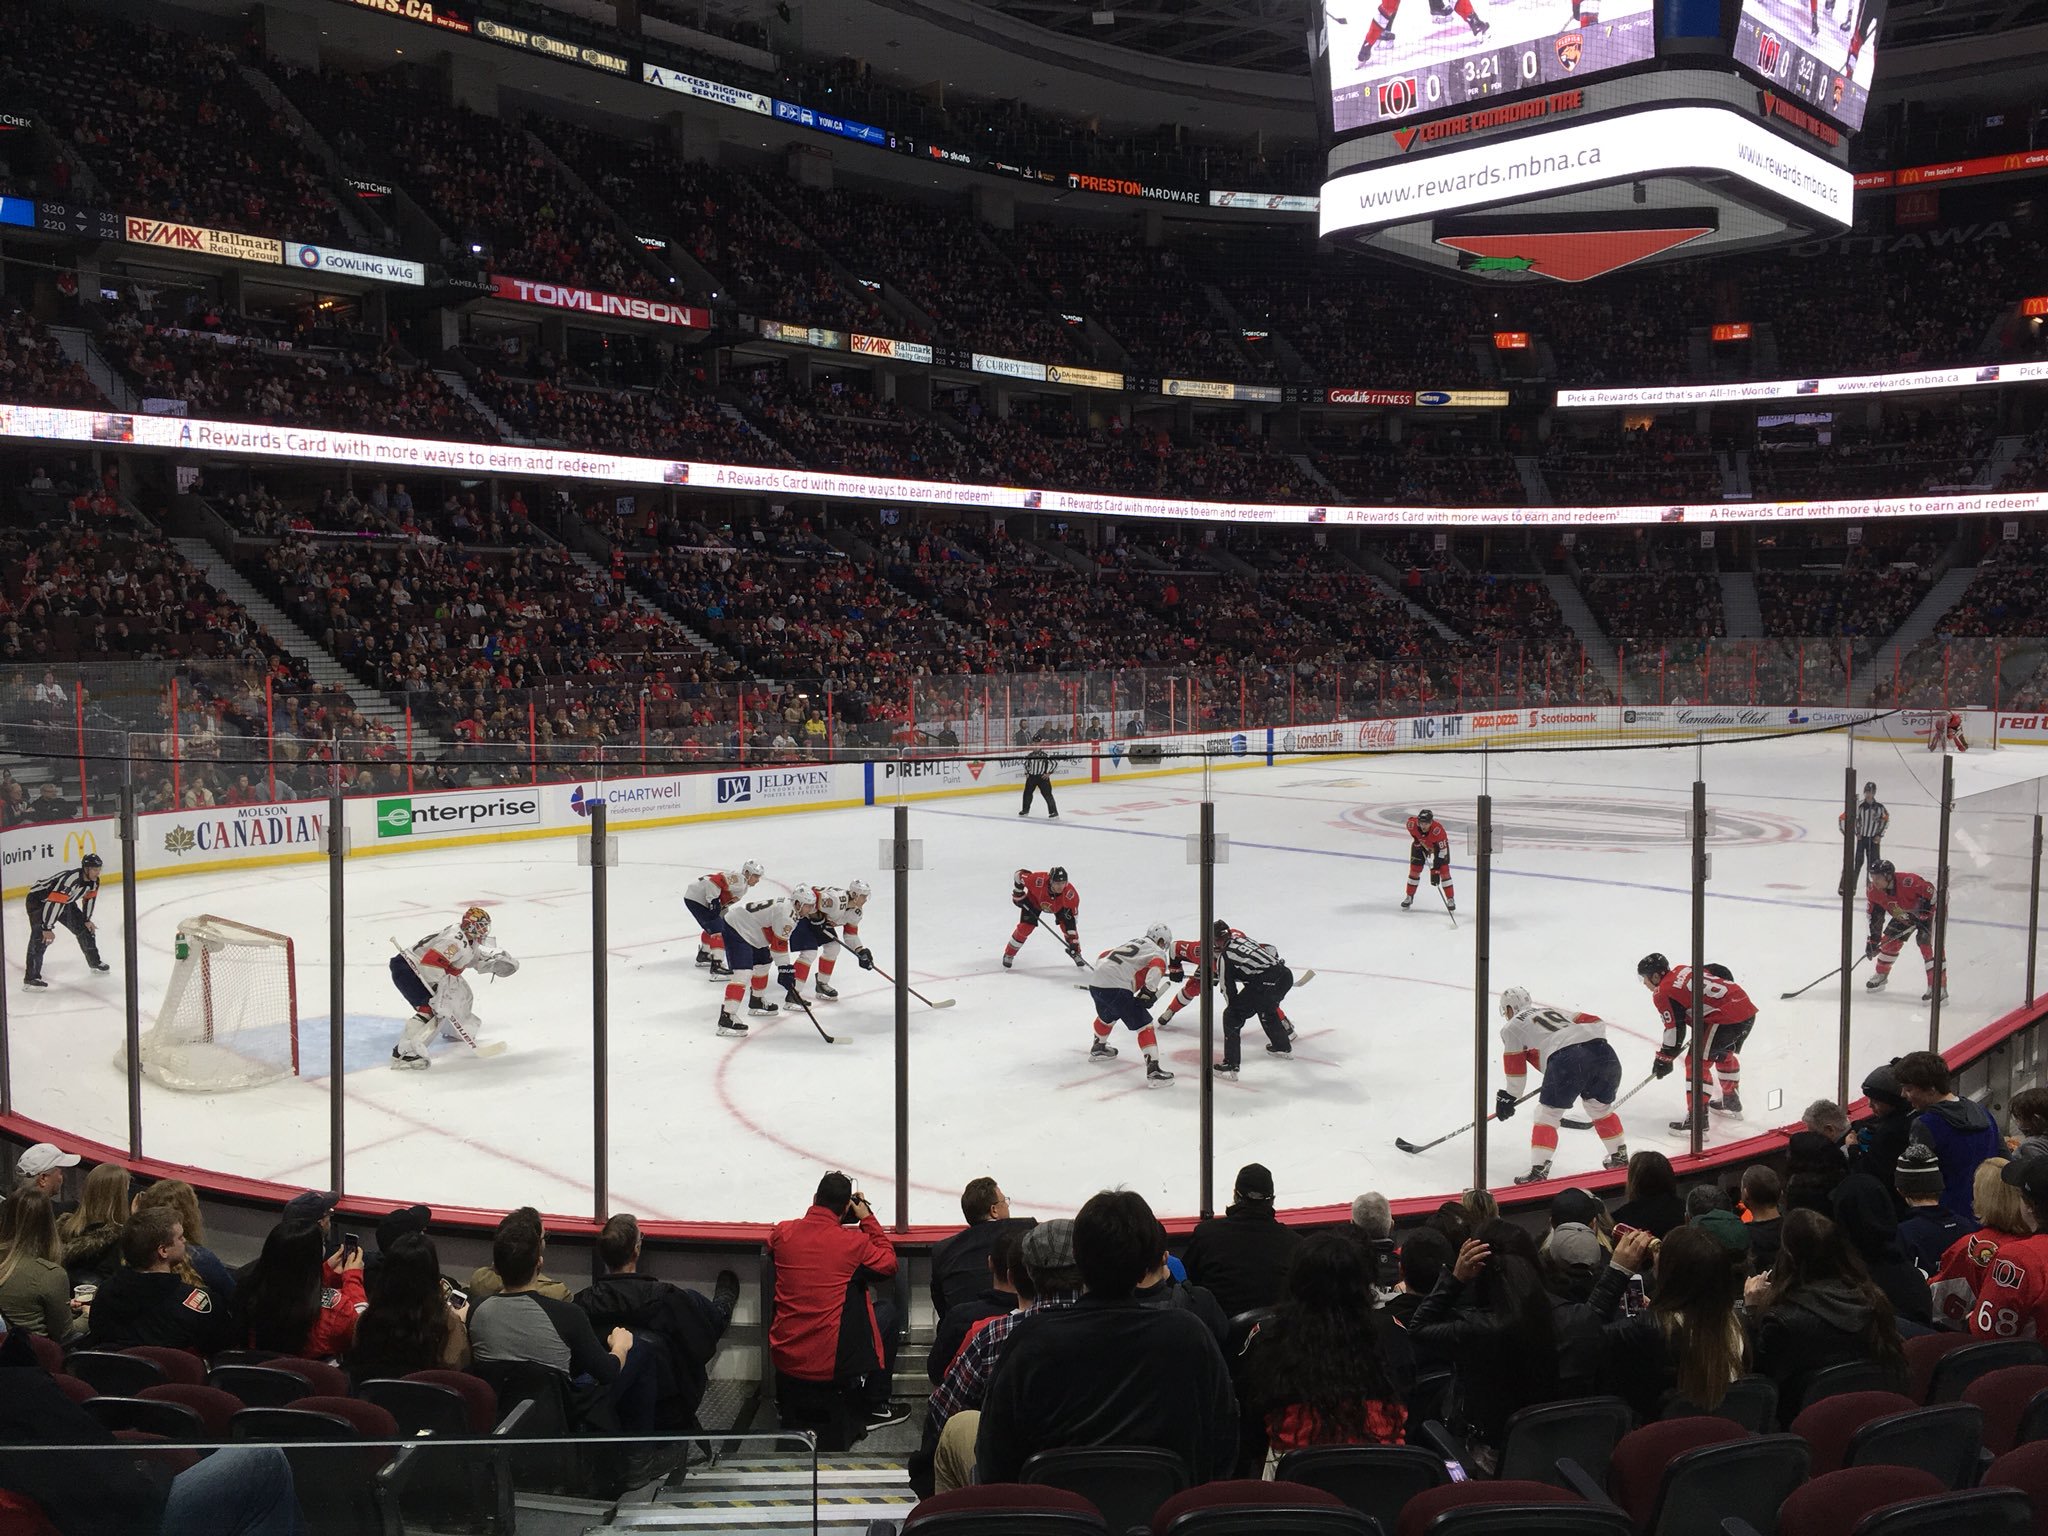 View from the lower level seats at the Canadian Tire Centre during an Ottawa Senators game.